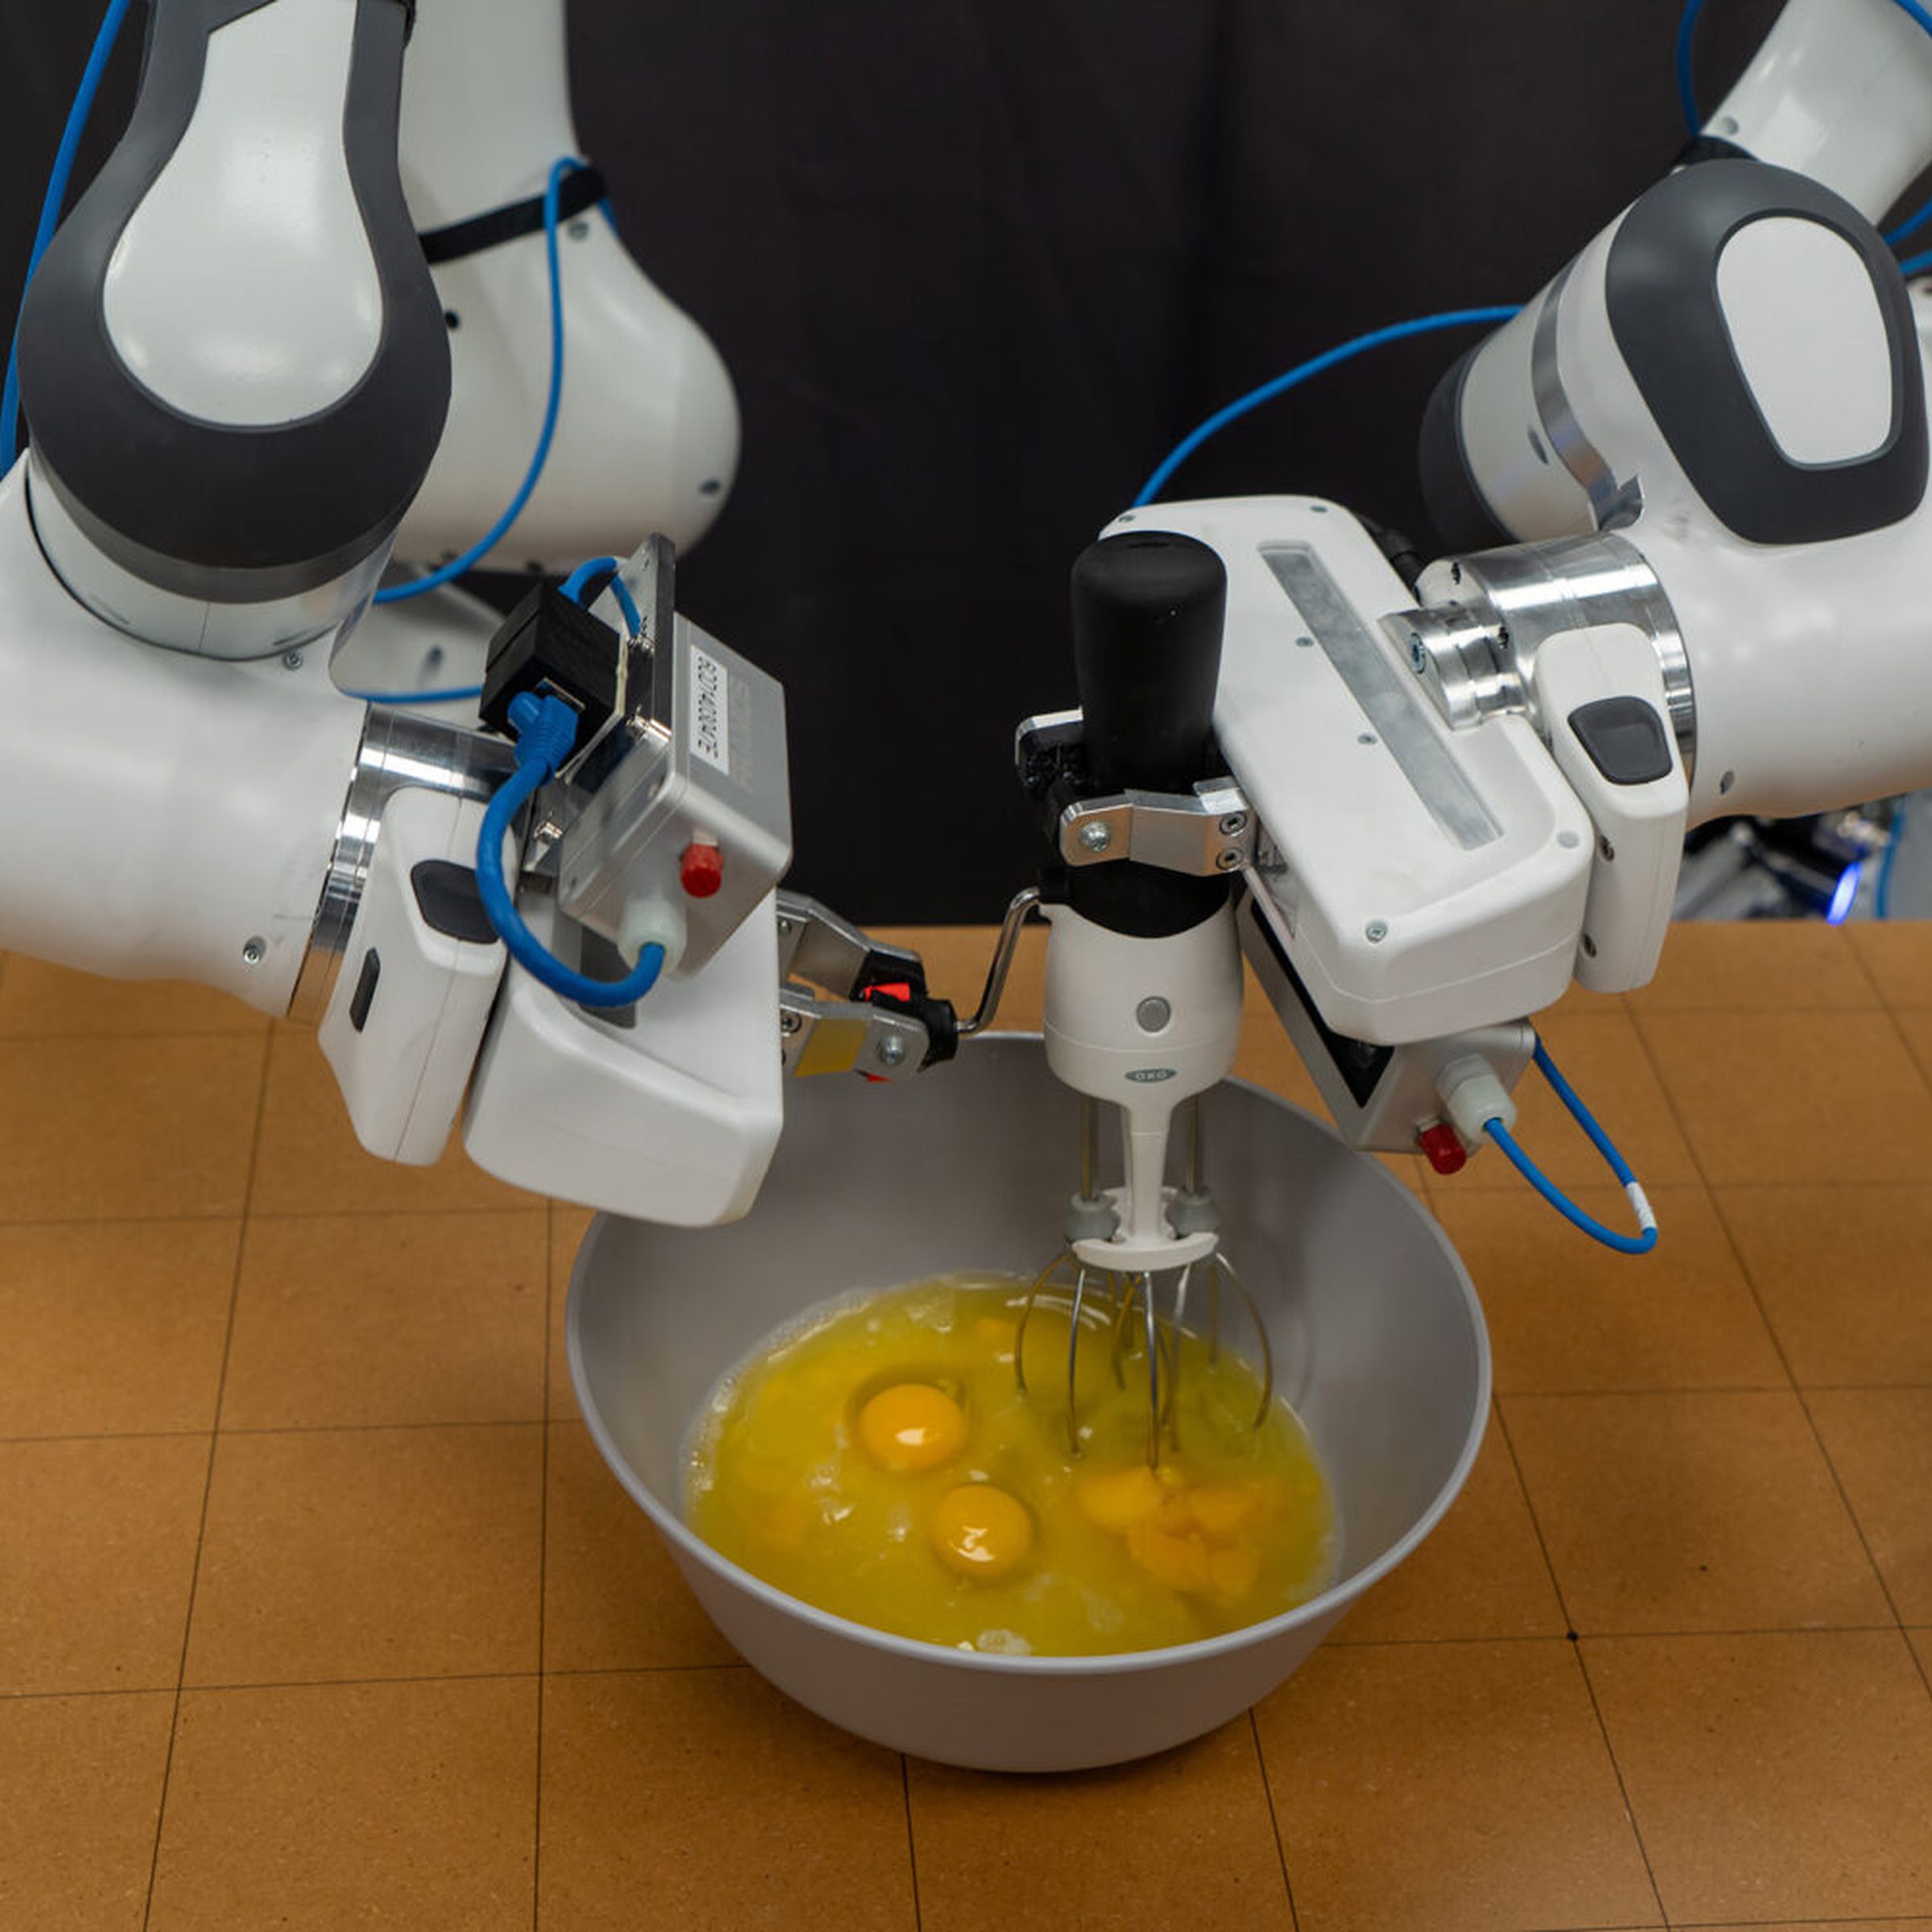 A picture of robotic arms whisking eggs in a metal bowl.